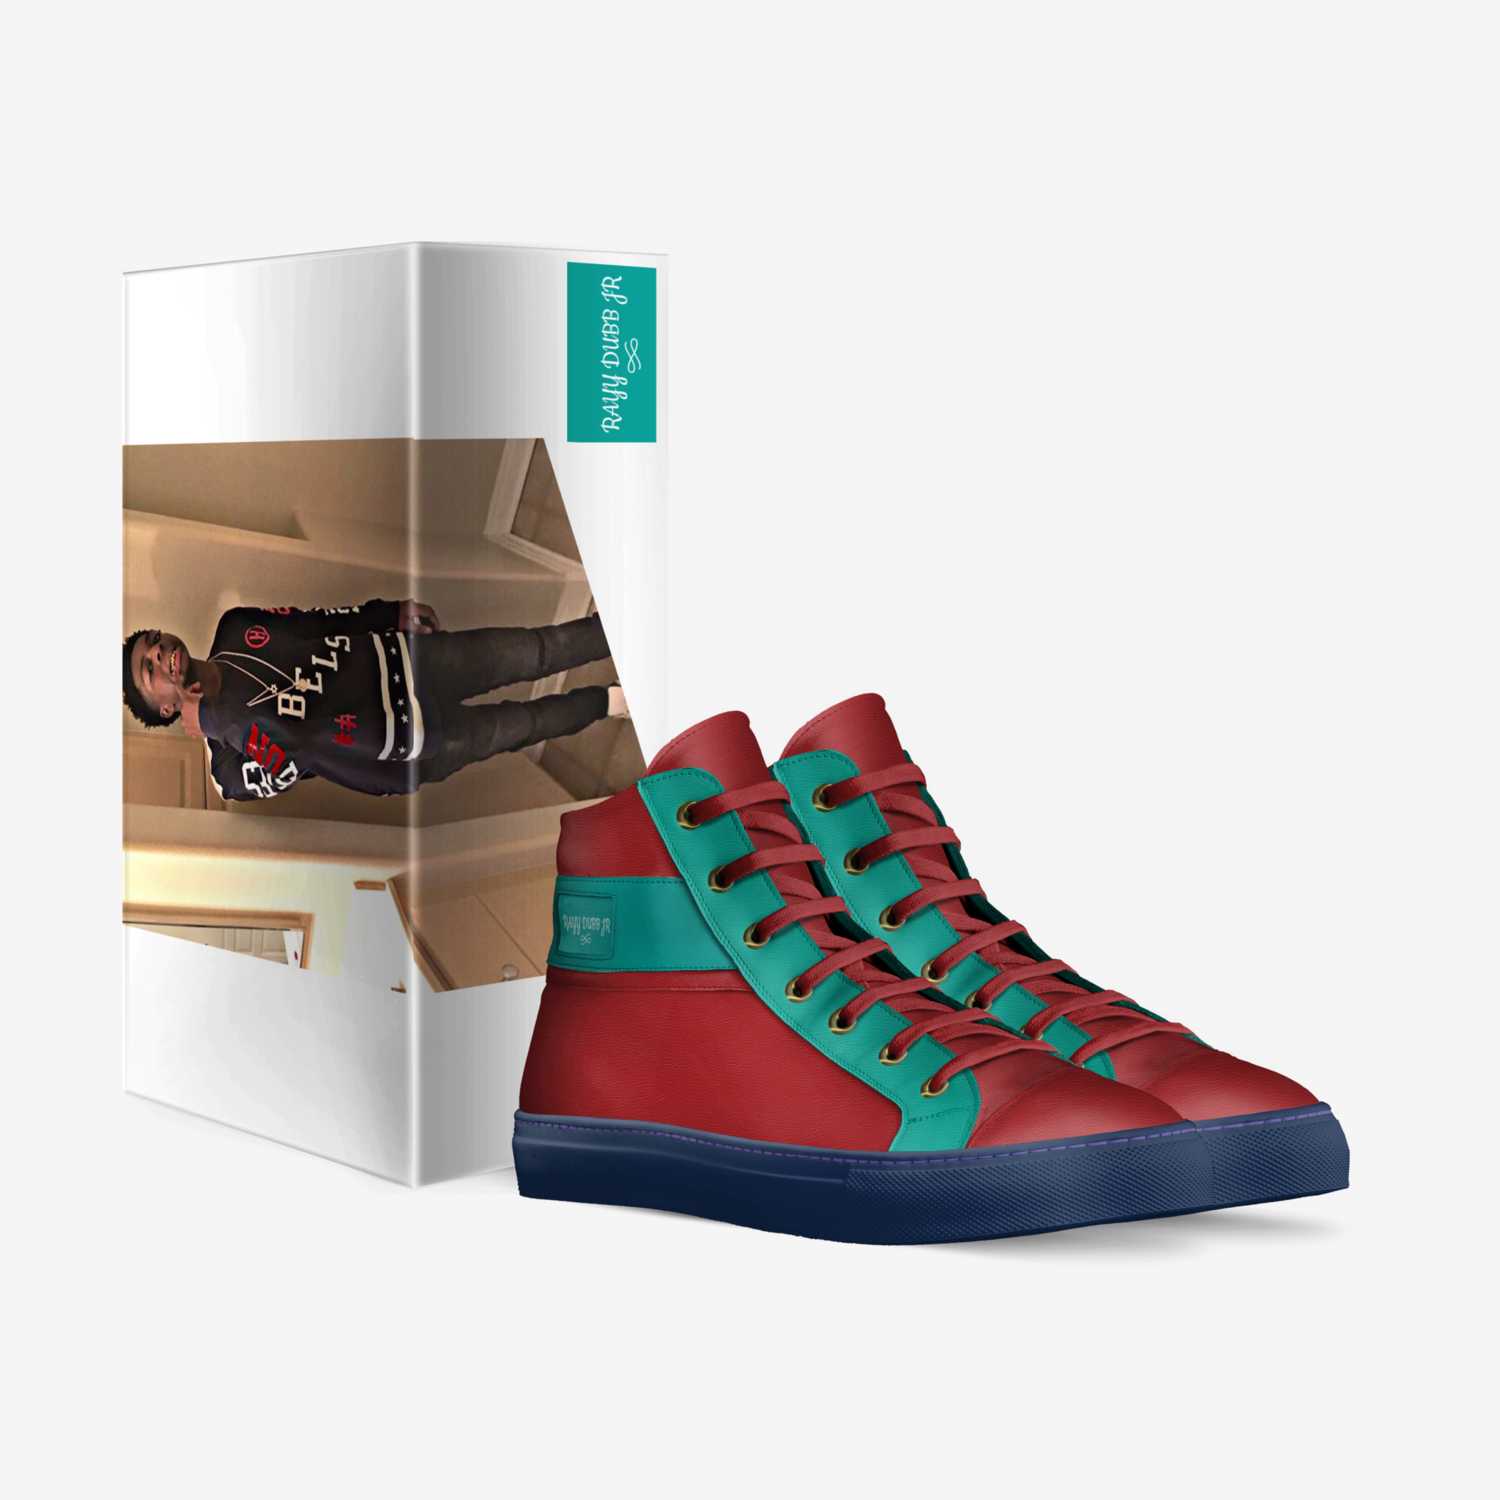 RAYY DUBB JR custom made in Italy shoes by Rayy Jr. | Box view